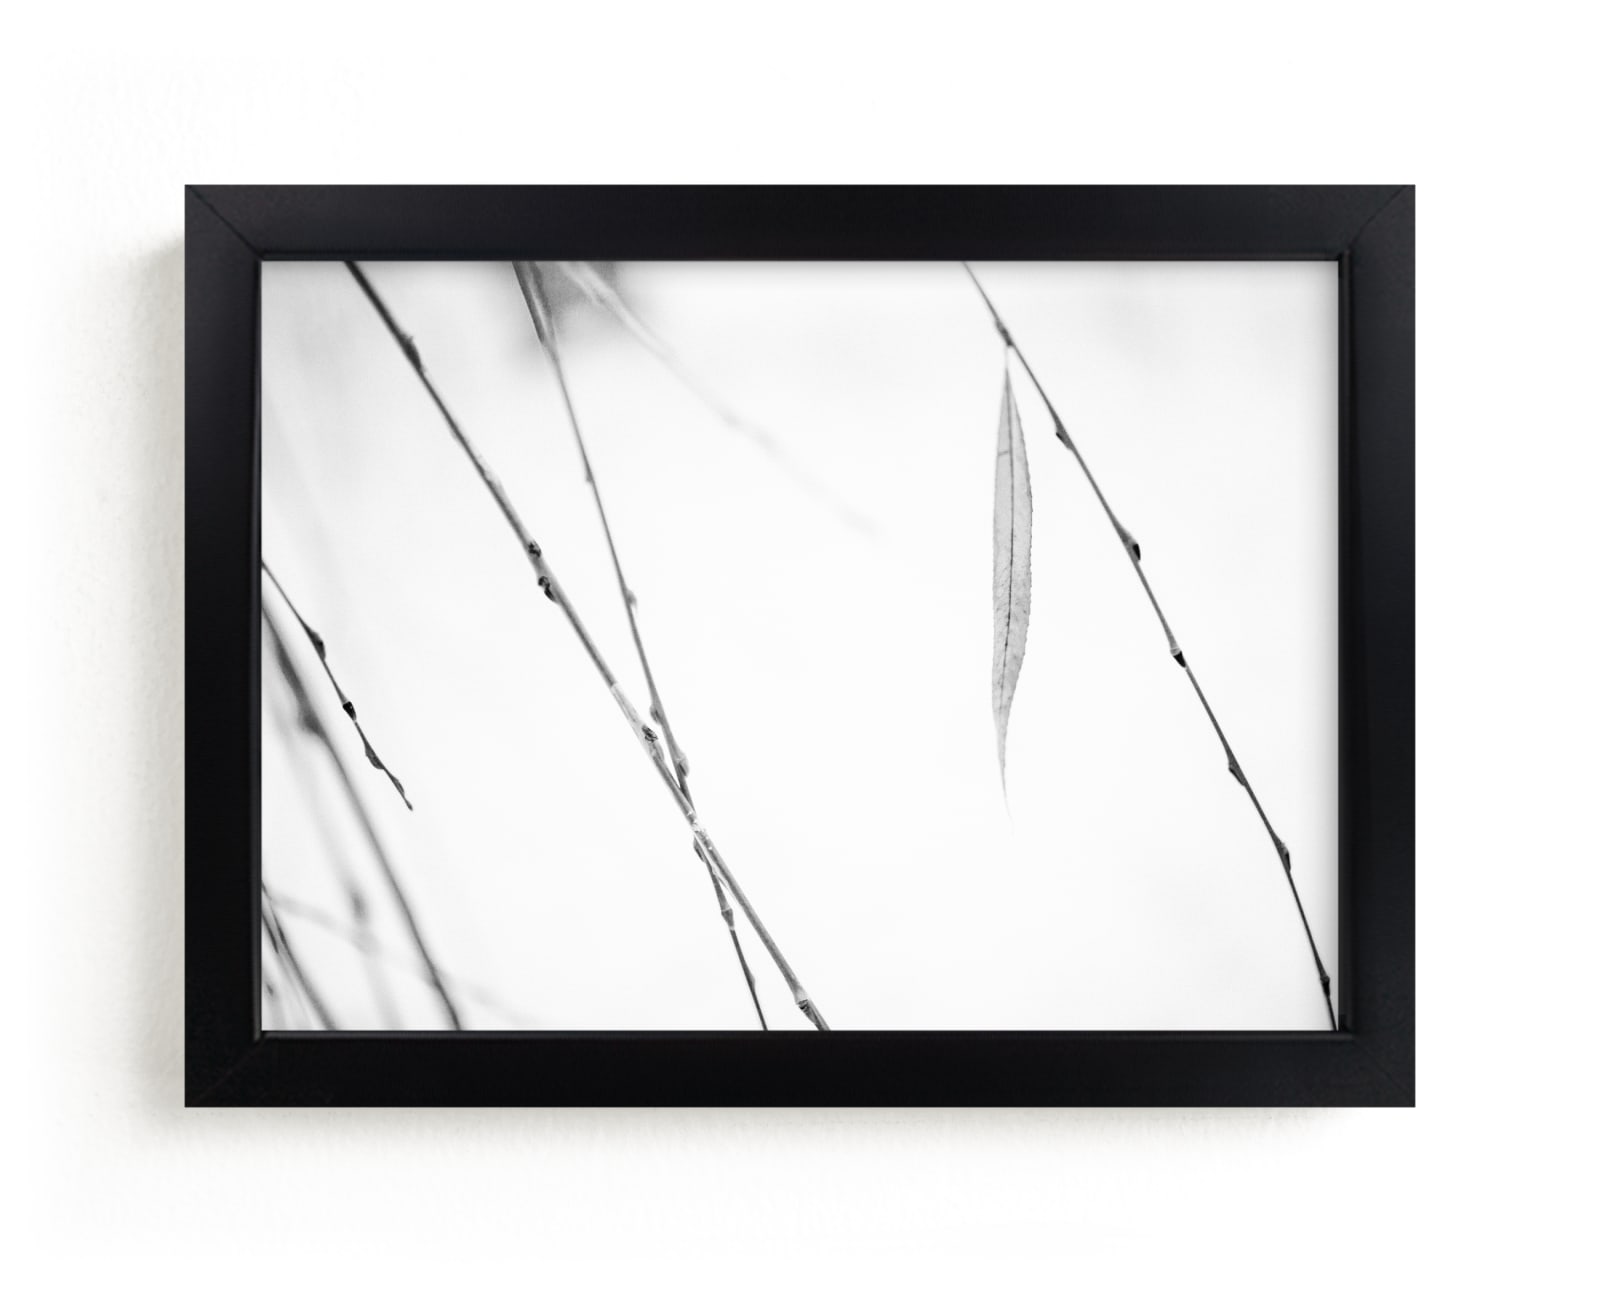 "	 CLOSER IV" by Lying on the grass in beautiful frame options and a variety of sizes.